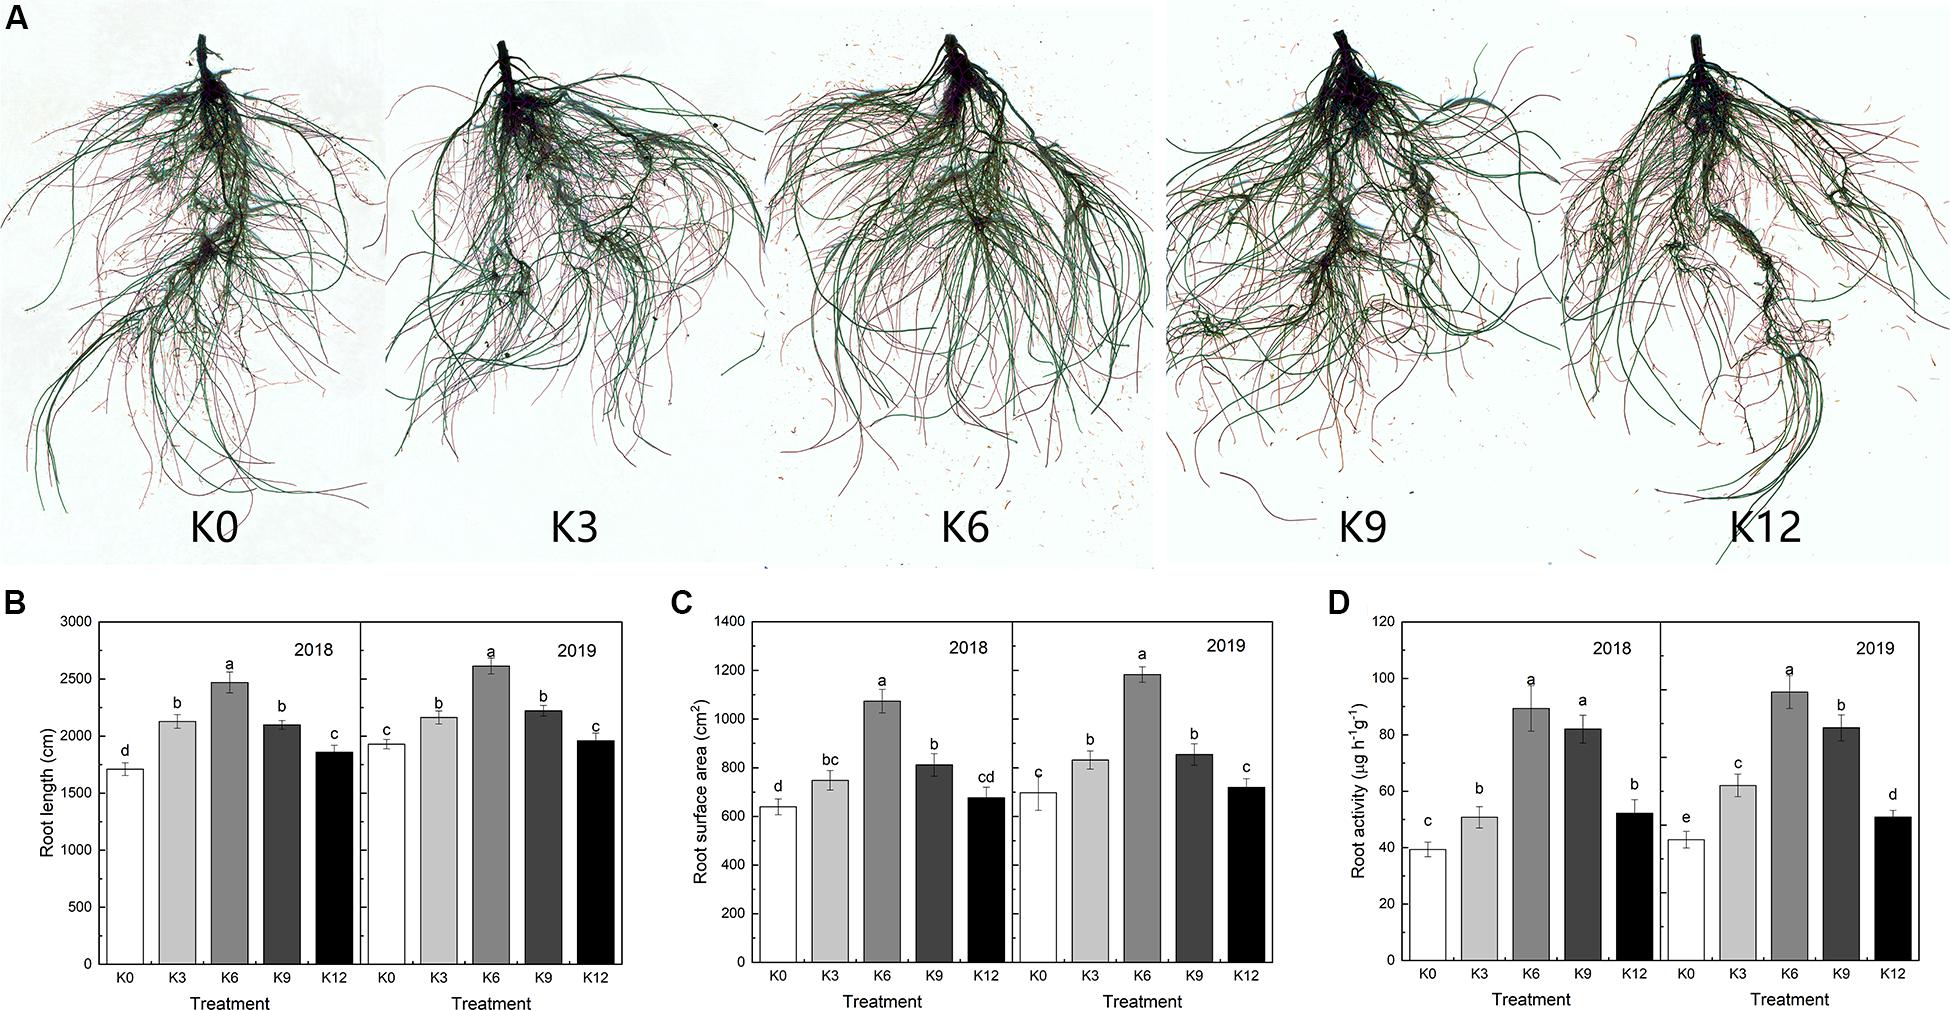 Frontiers Effects Of Potassium Levels On Plant Growth Accumulation And Distribution Of Carbon And Nitrate Metabolism In Apple Dwarf Rootstock Seedlings Plant Science